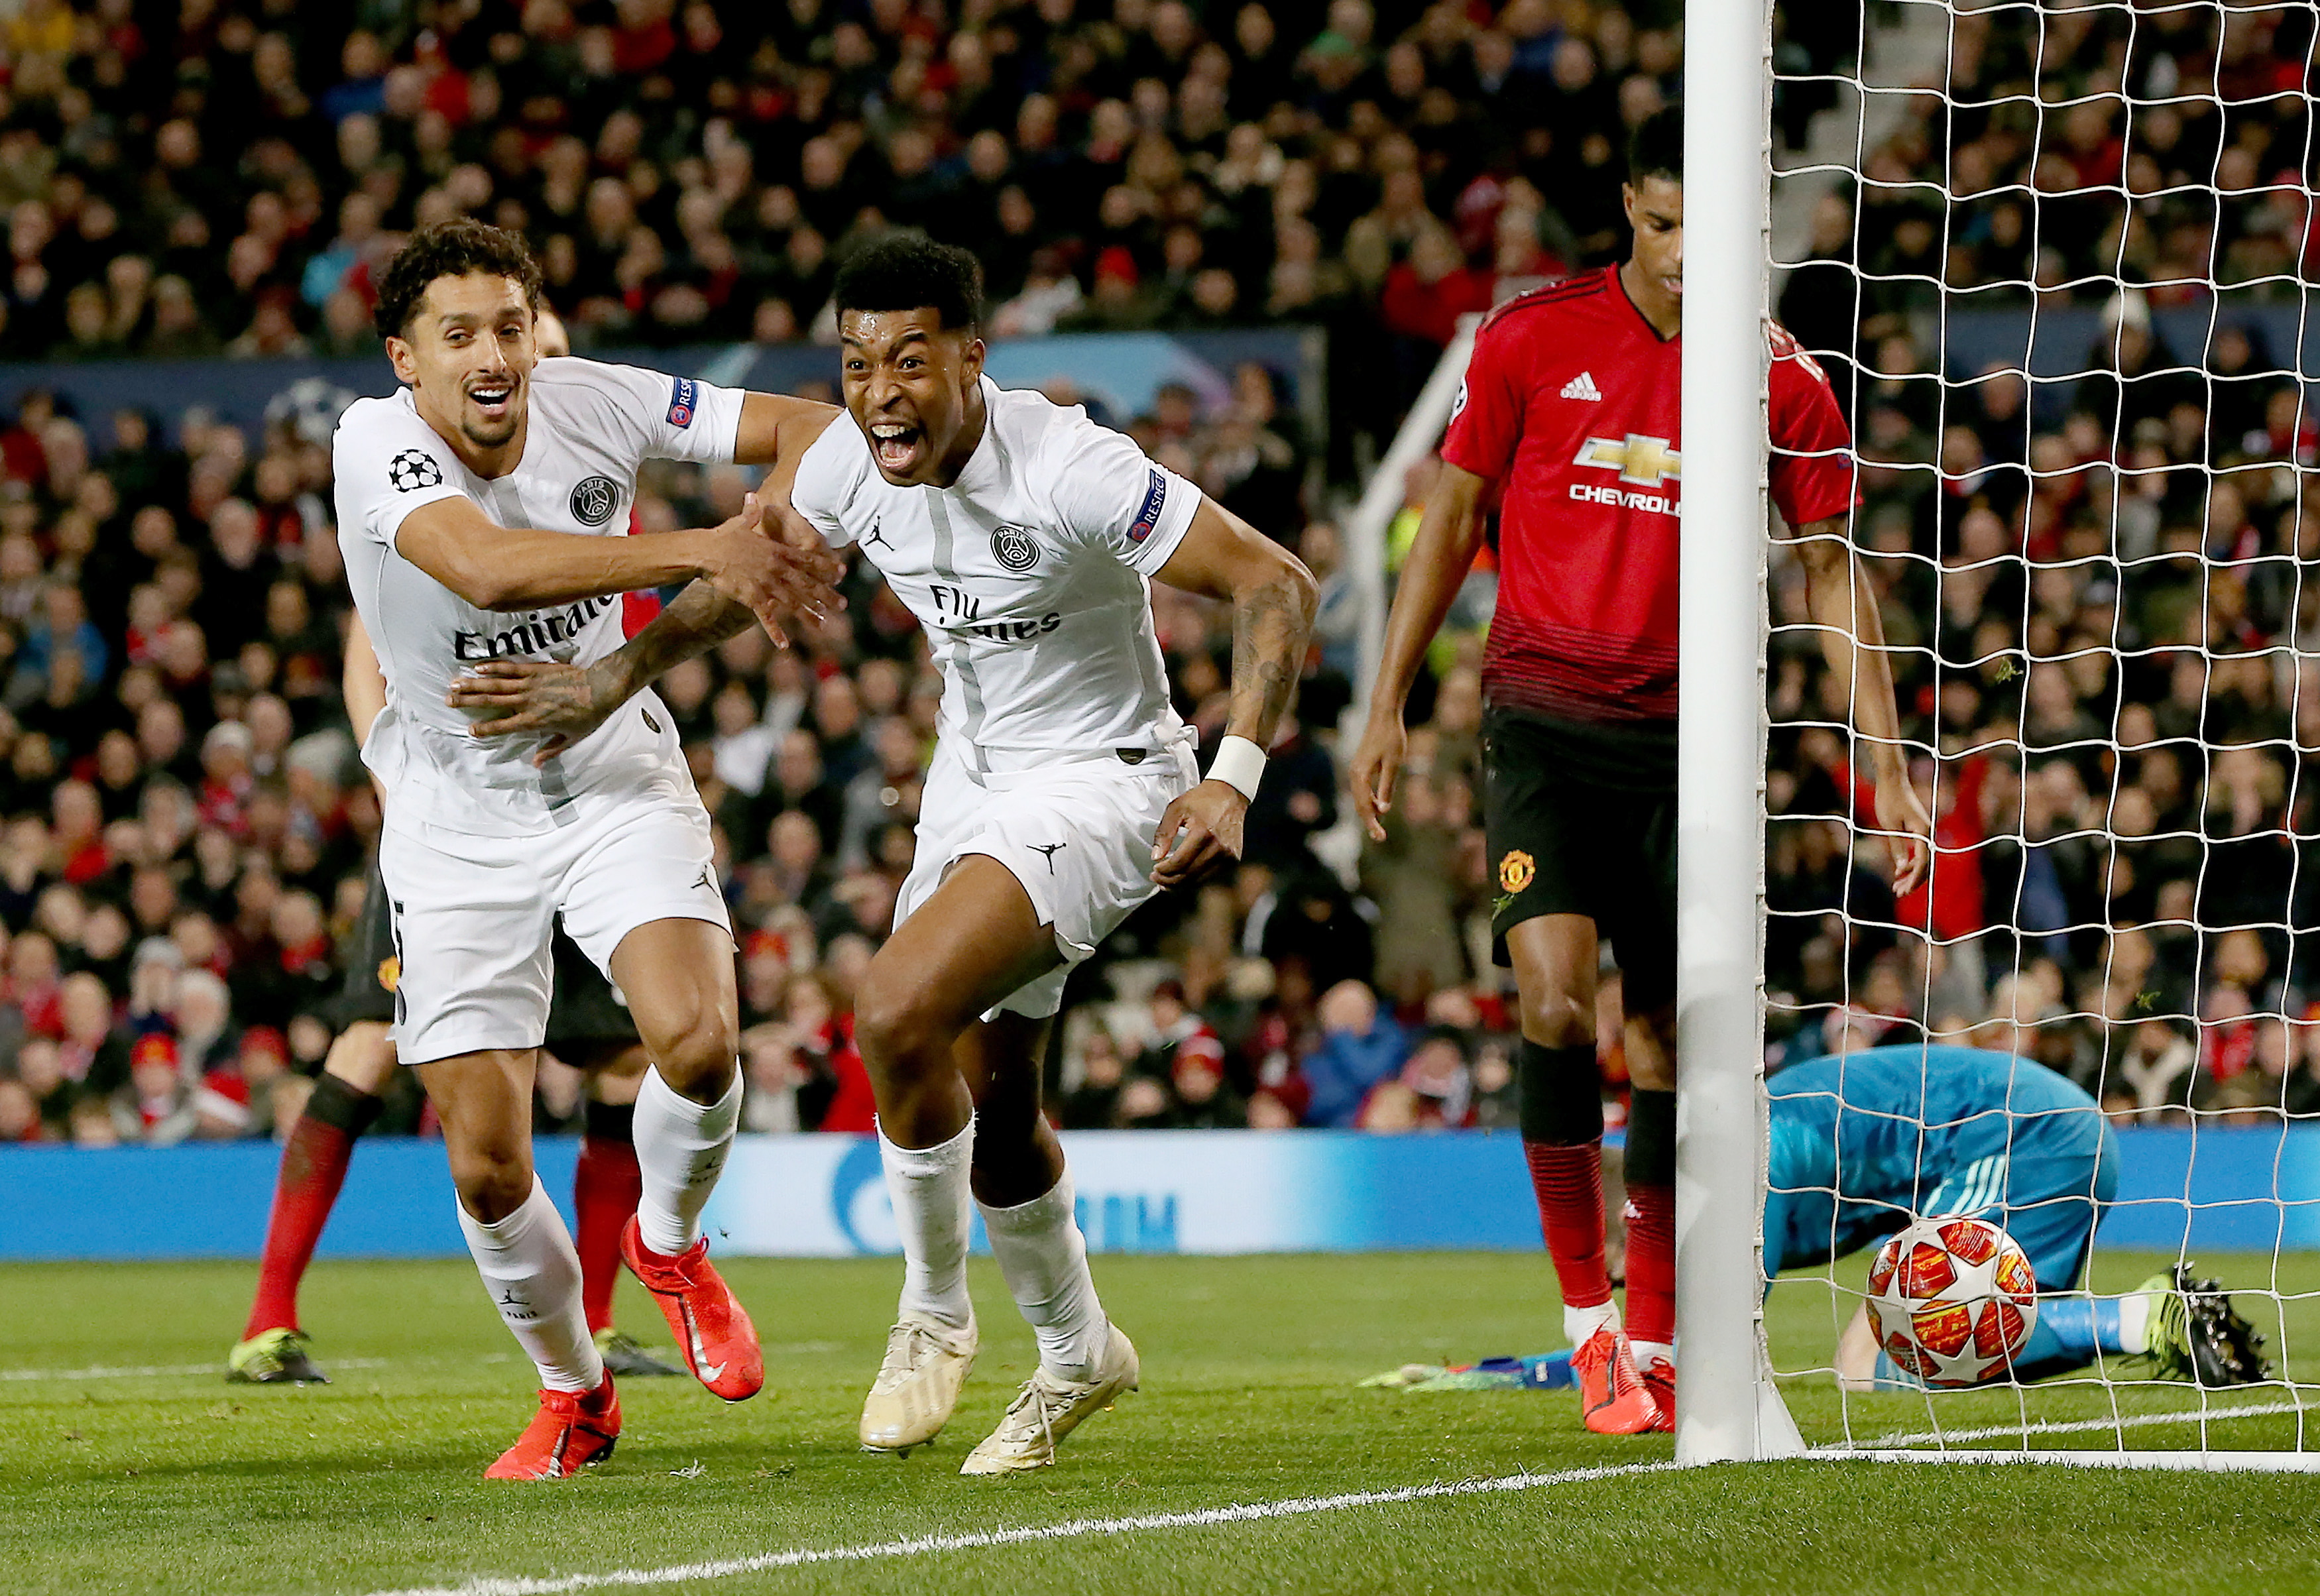 epa07365544 Paris Saint Germain's Presnel Kimpembe (C) celebrates scoring the 1-0 lead during the UEFA Champions League round of 16 first leg soccer match between Manchester United and Paris Saint Germain at Old Trafford Stadium in Manchester, Britain, 12 February 2019.  EPA/NIGEL RODDIS